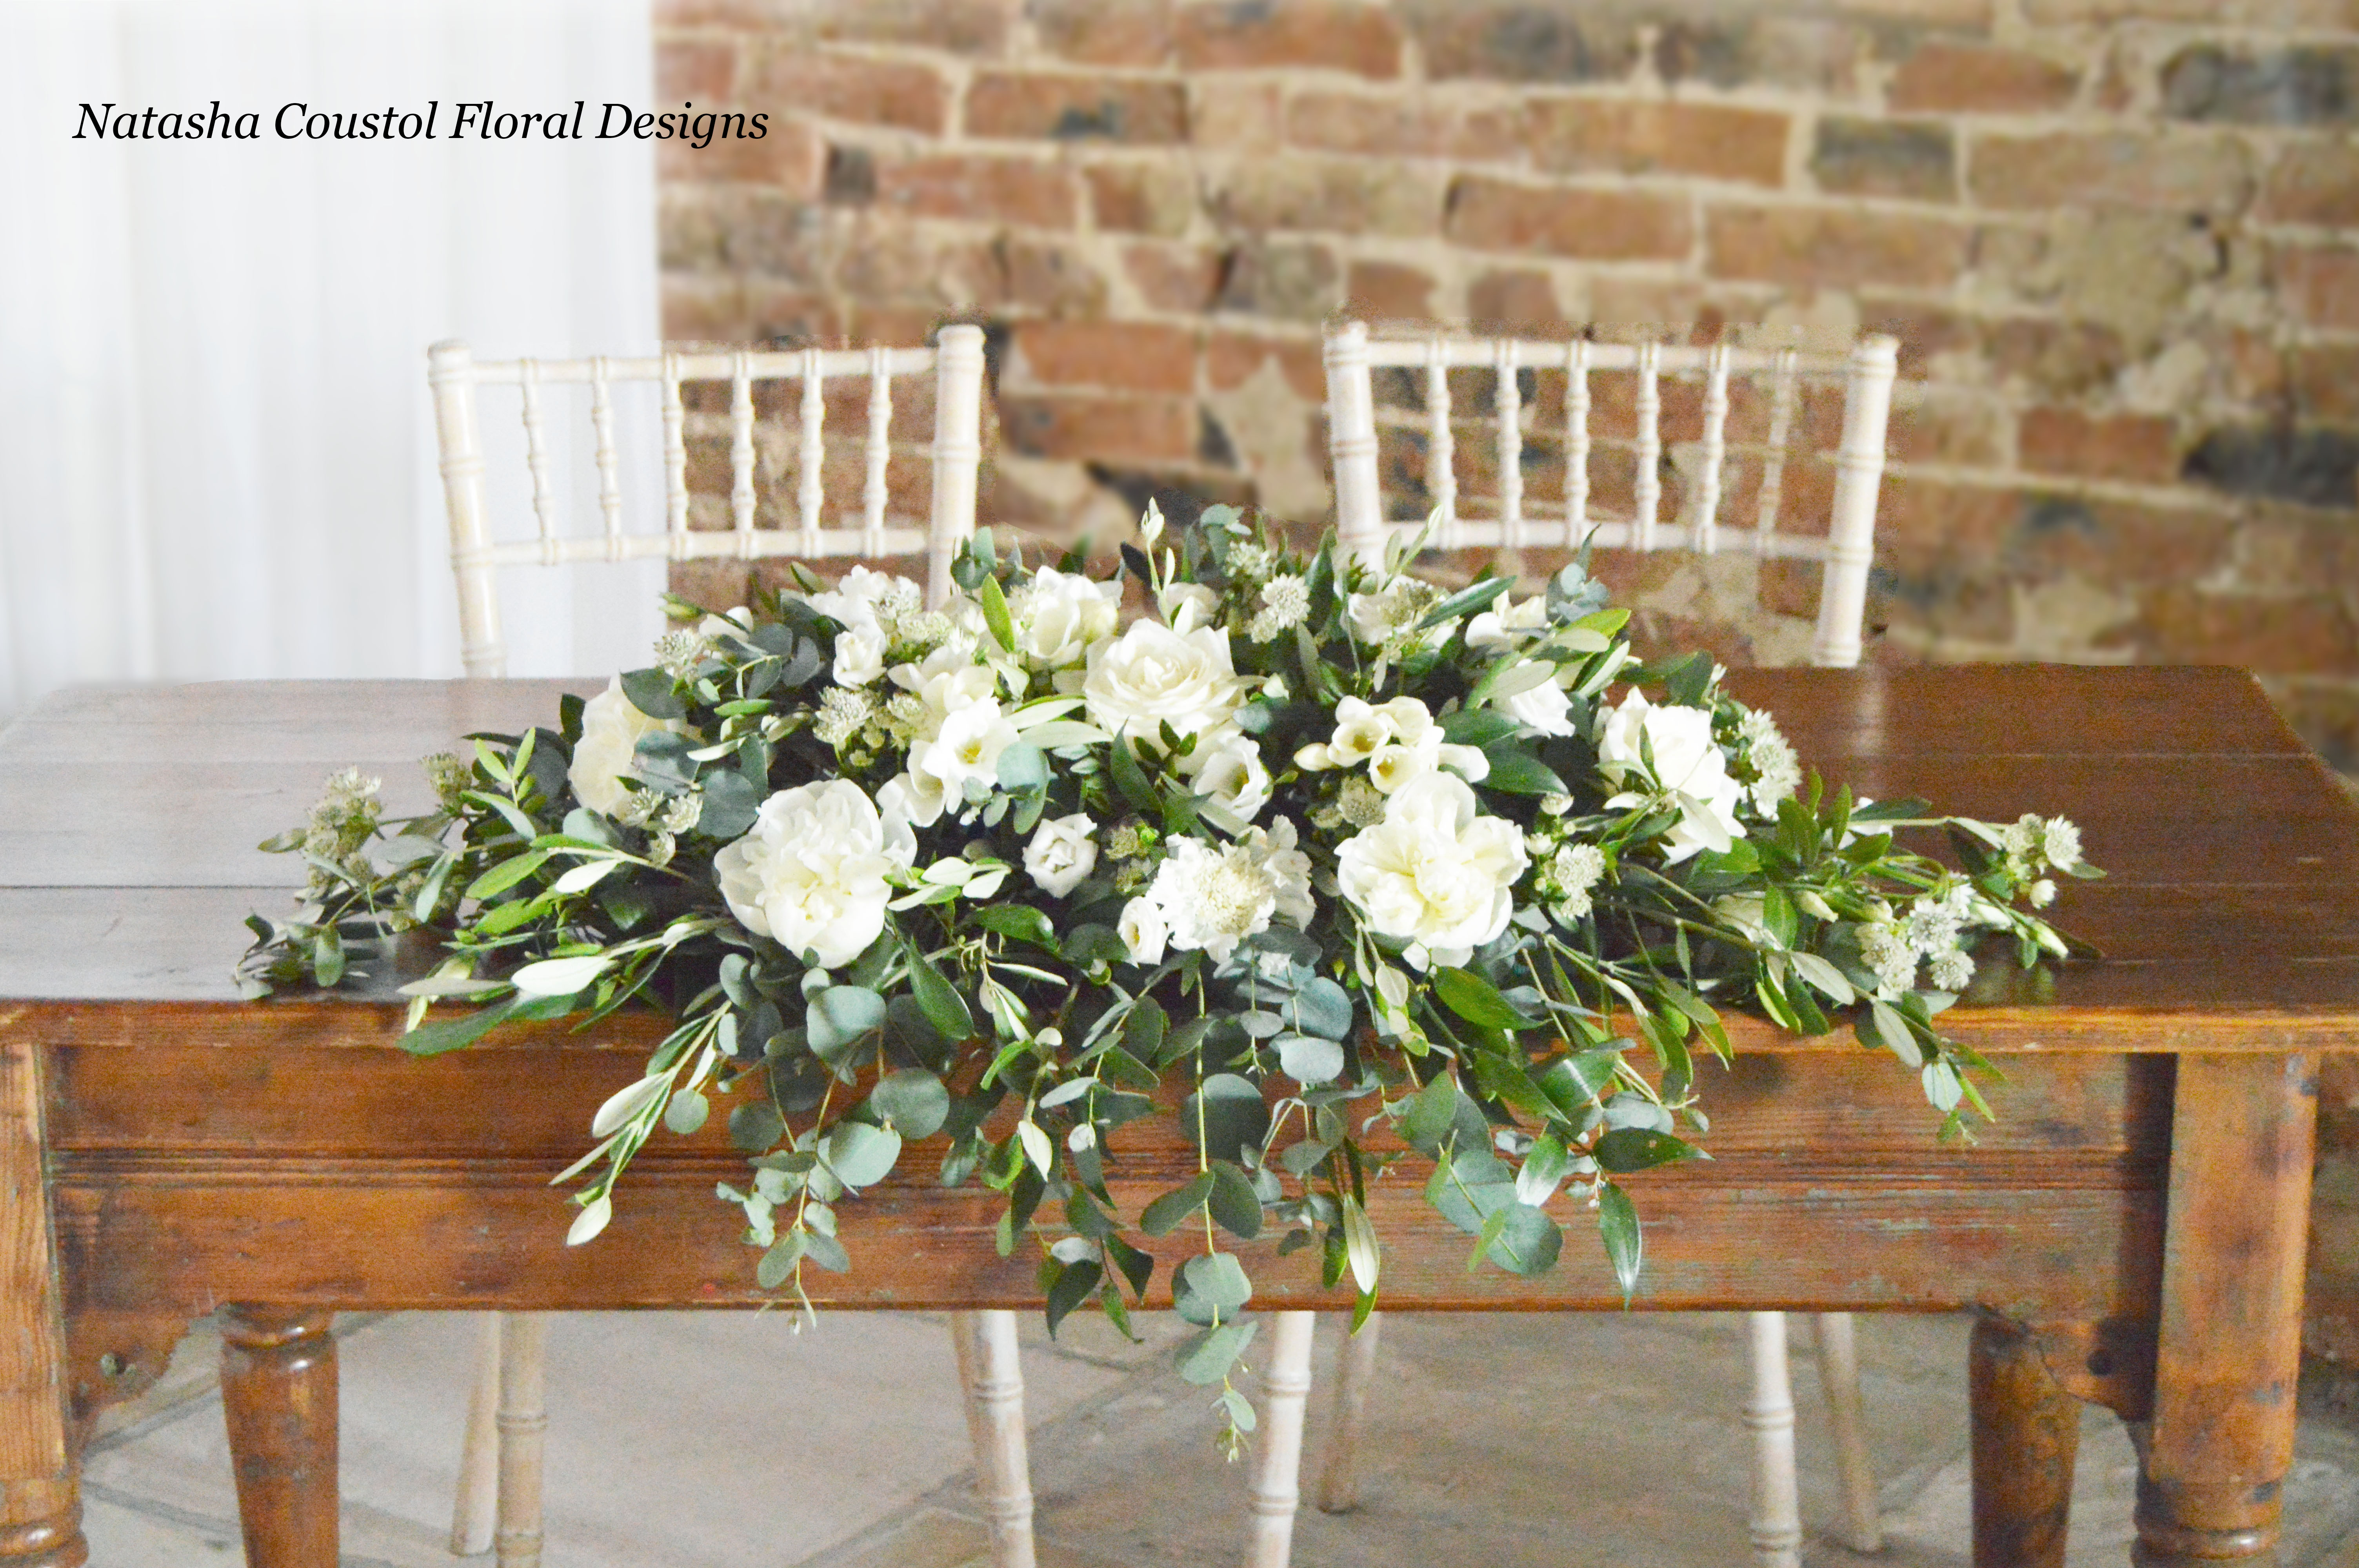 barnbyfield-barns-ceremony-flowers-white-and-green-wedding-copy-2 Grid No Space 5 Columns